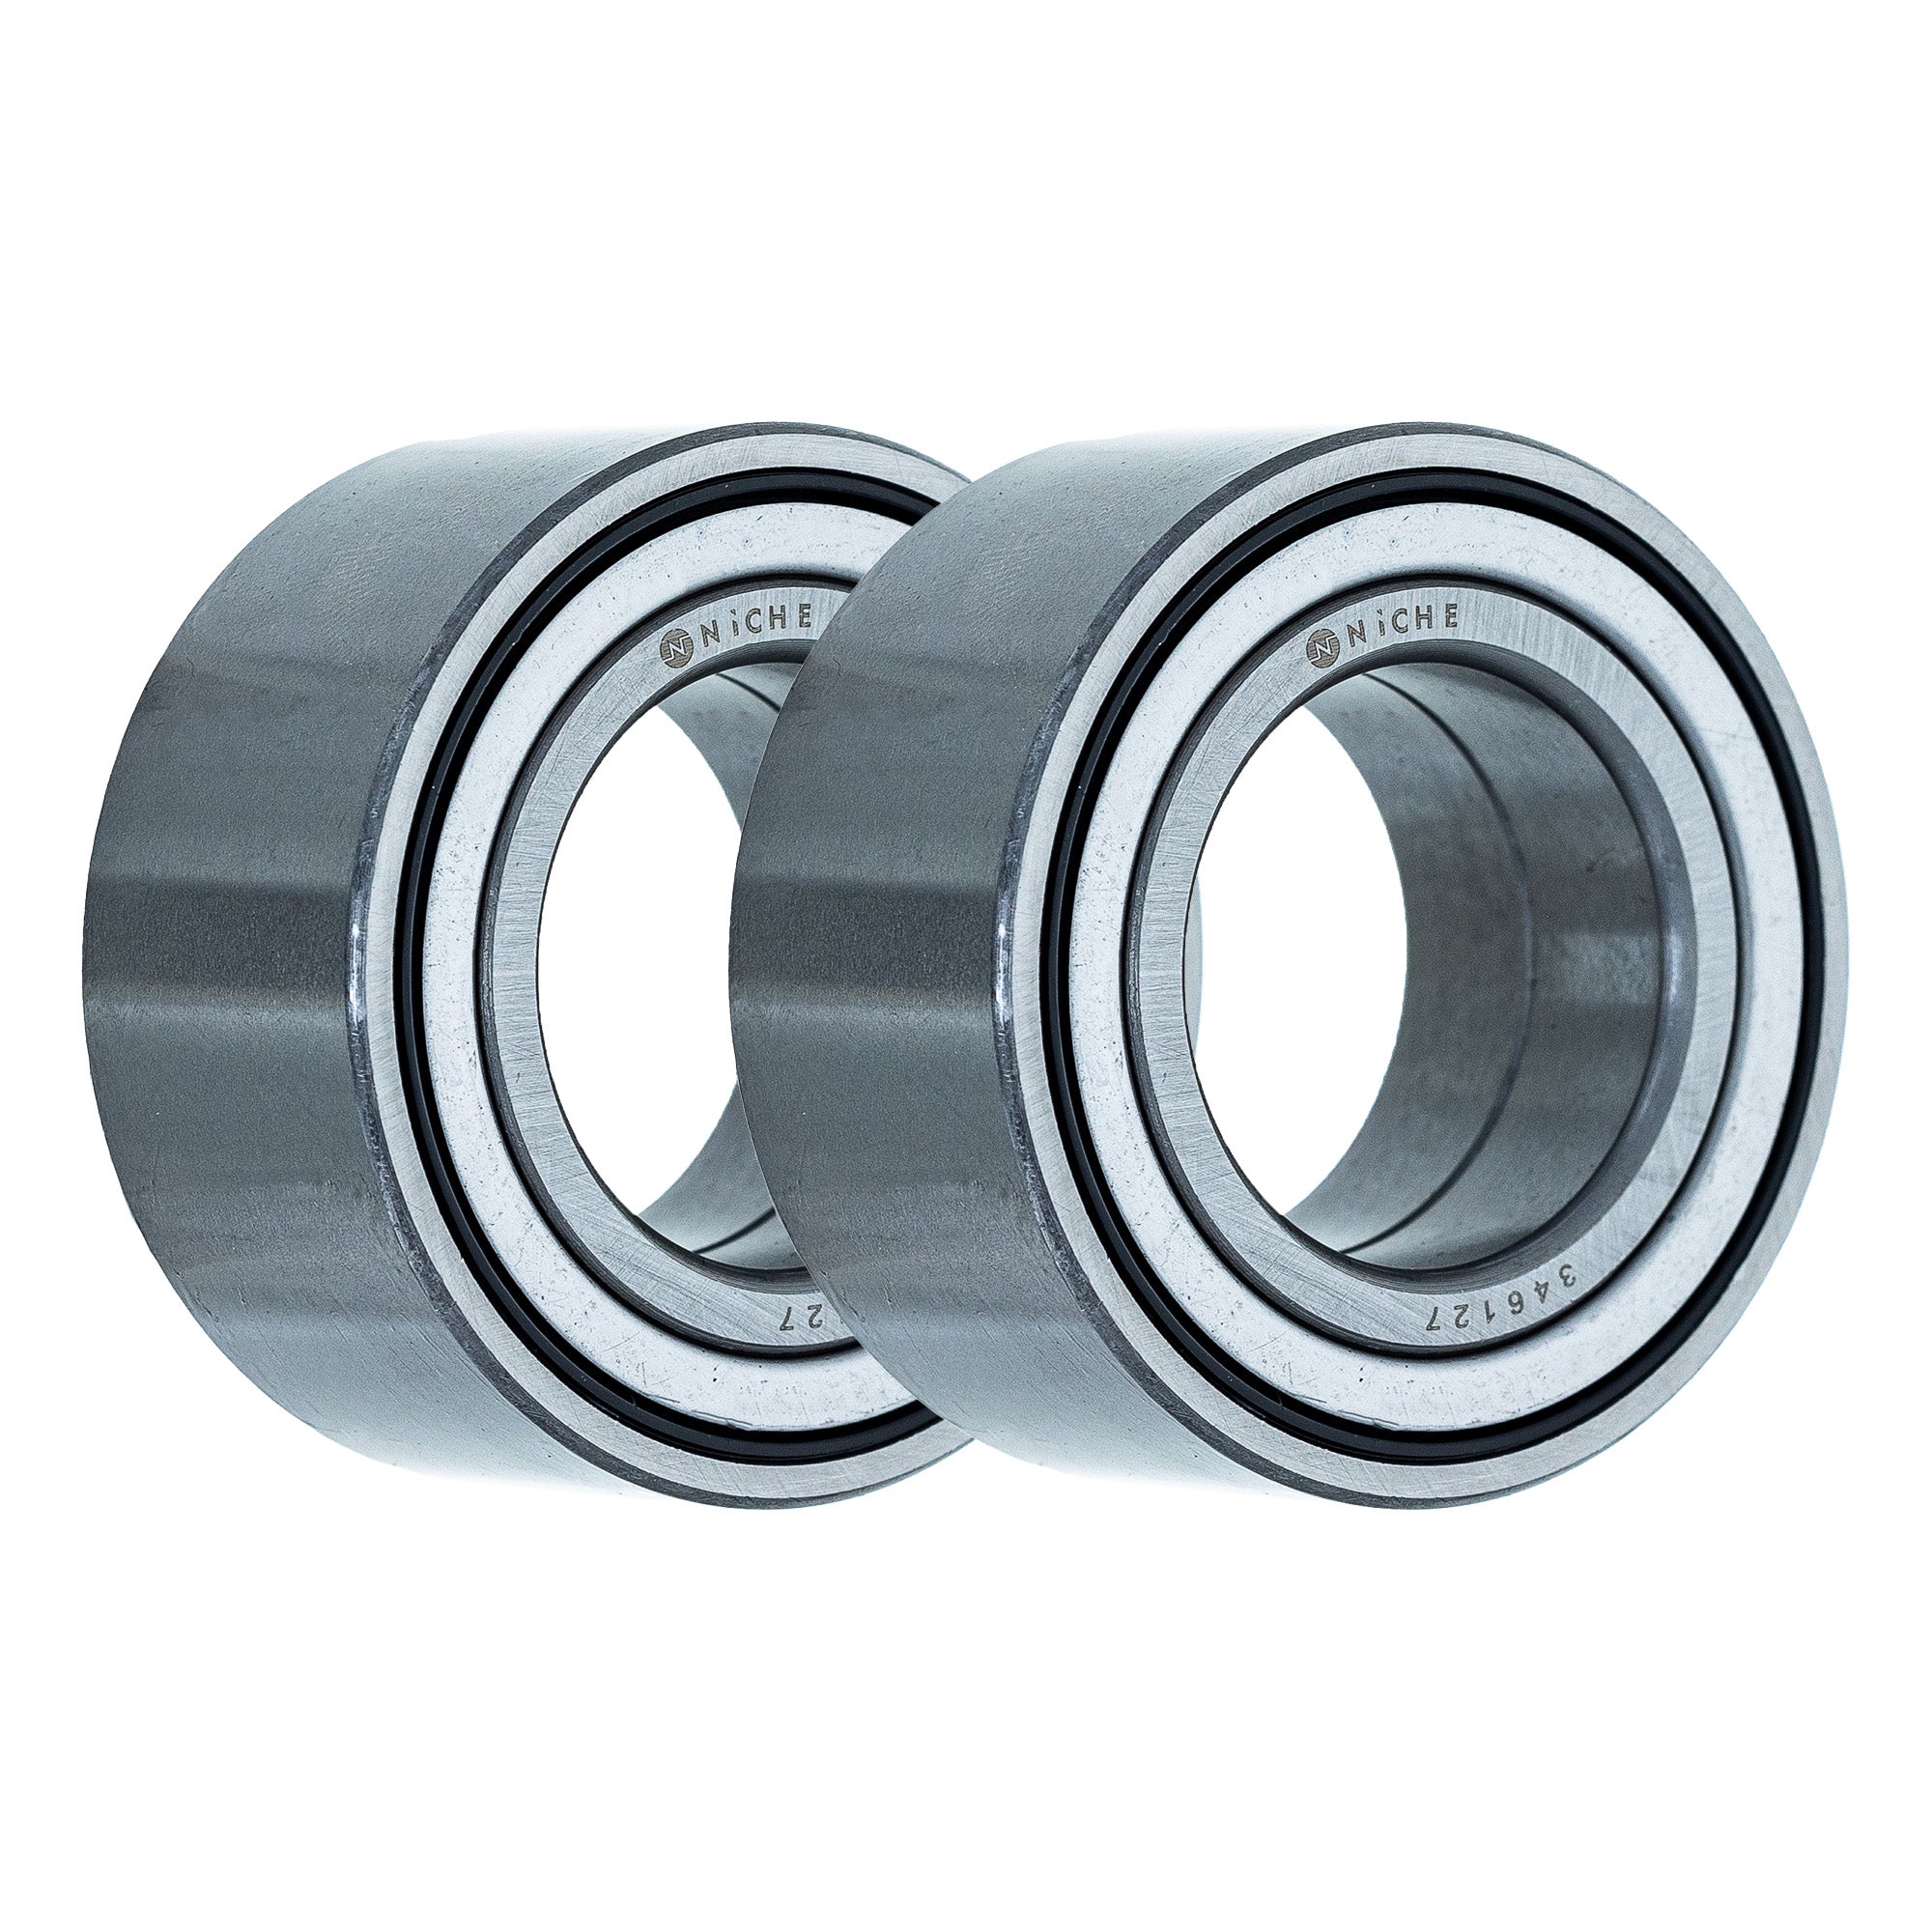 Double Row, Angular Contact, Ball Bearing Pack of 2 2-Pack for zOTHER TRX90 TRX700 TRX450 NICHE 519-CBB2293R